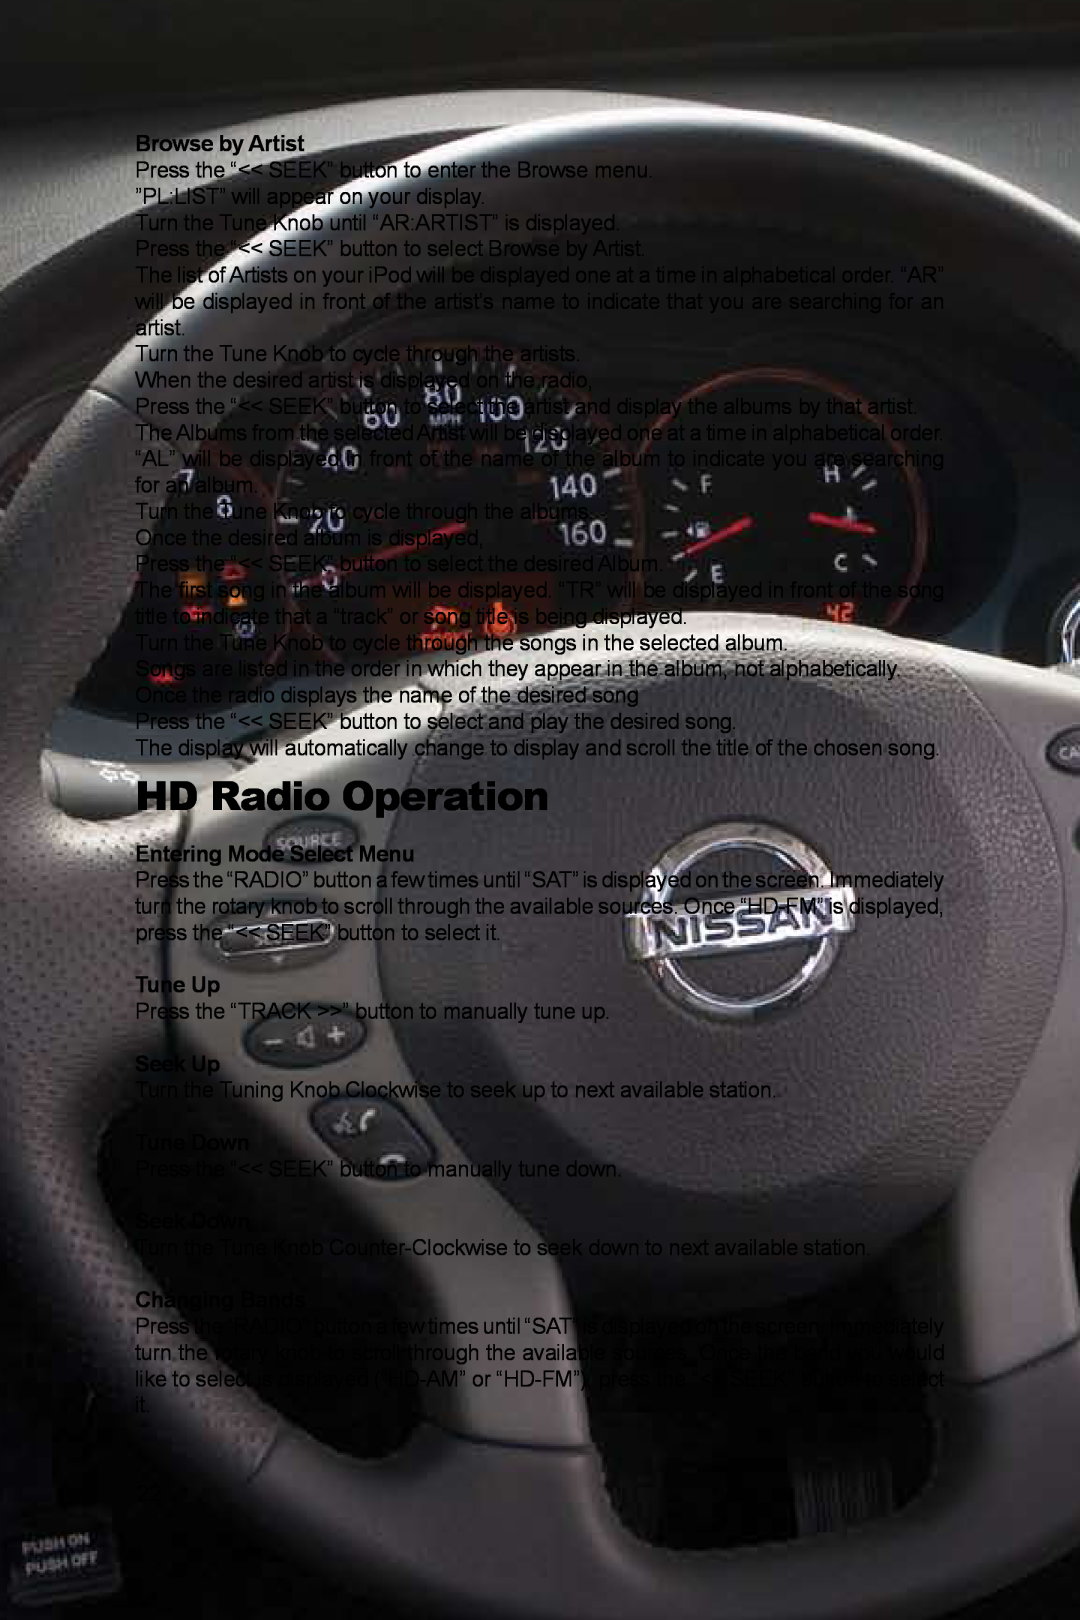 Peripheral Electronics PGHNI2 HD Radio Operation, Browse by Artist, Entering Mode Select Menu, Tune Up, Seek Up, Tune Down 